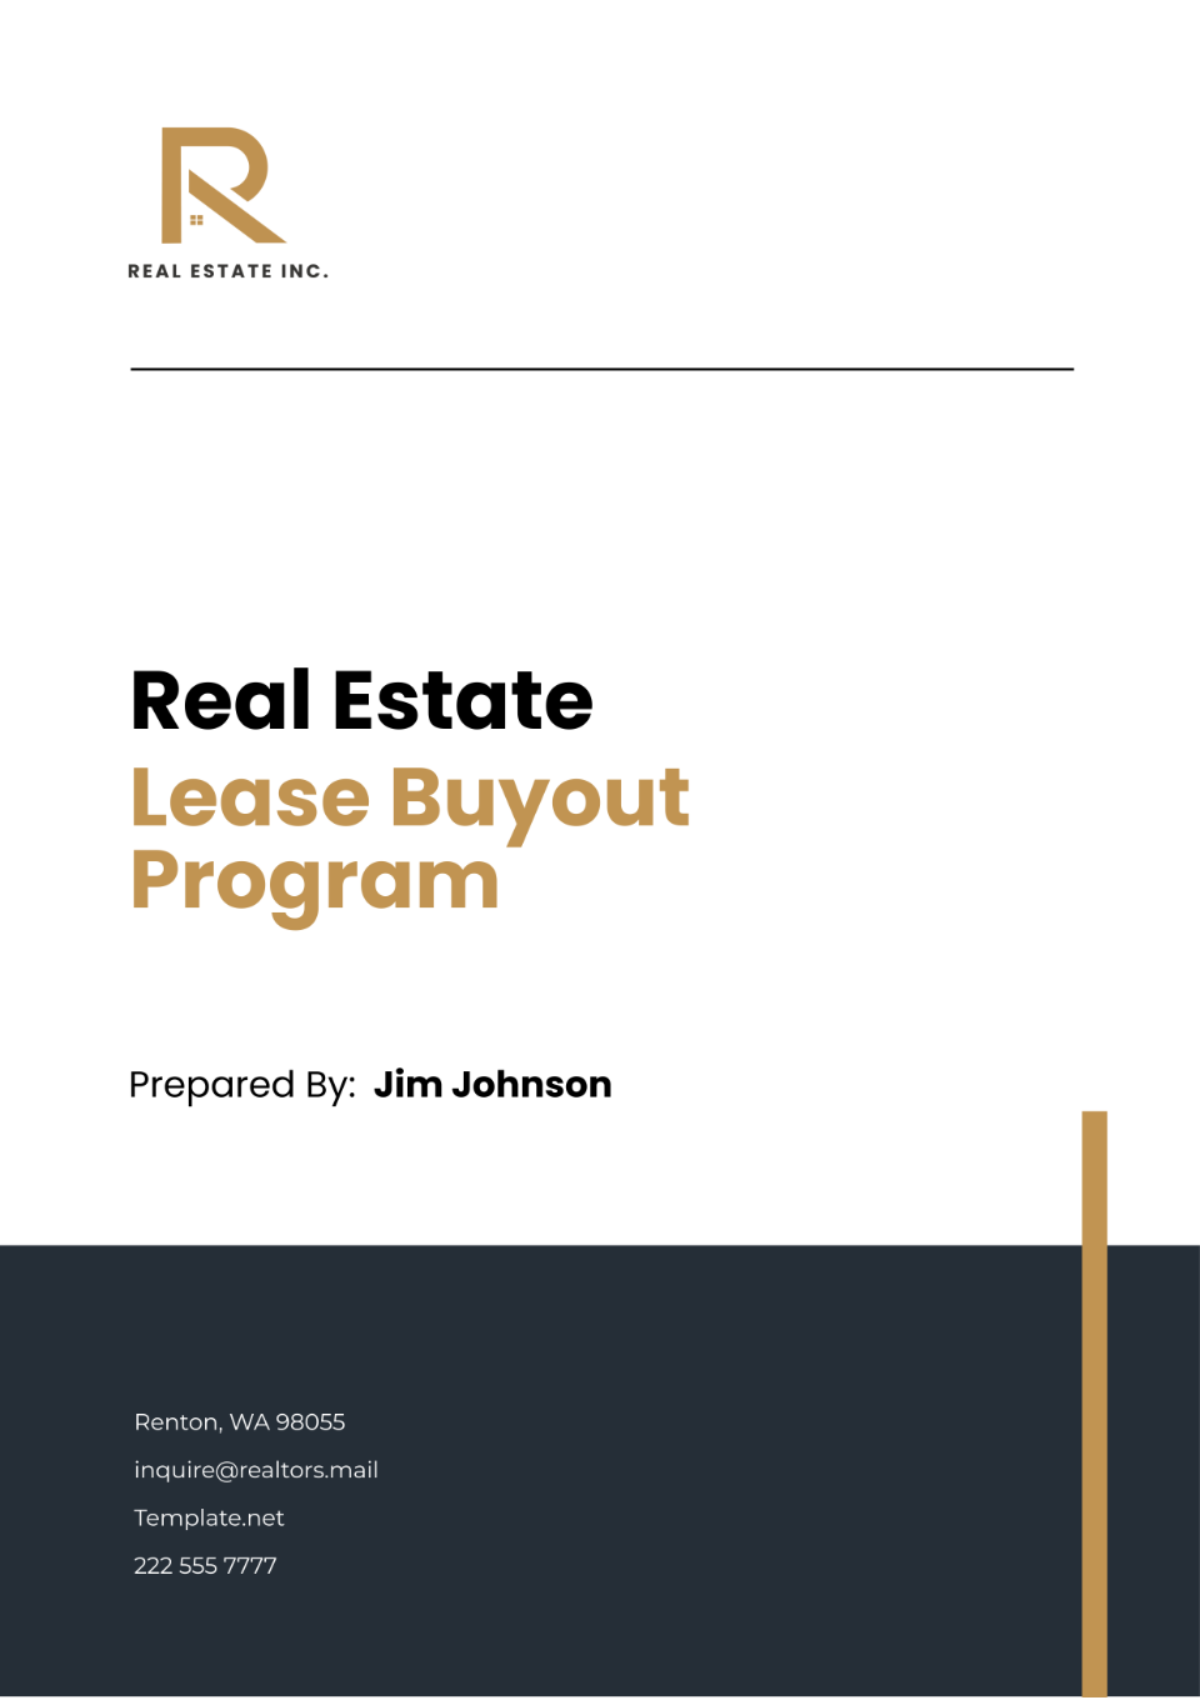 Real Estate Lease Buyout Program Template